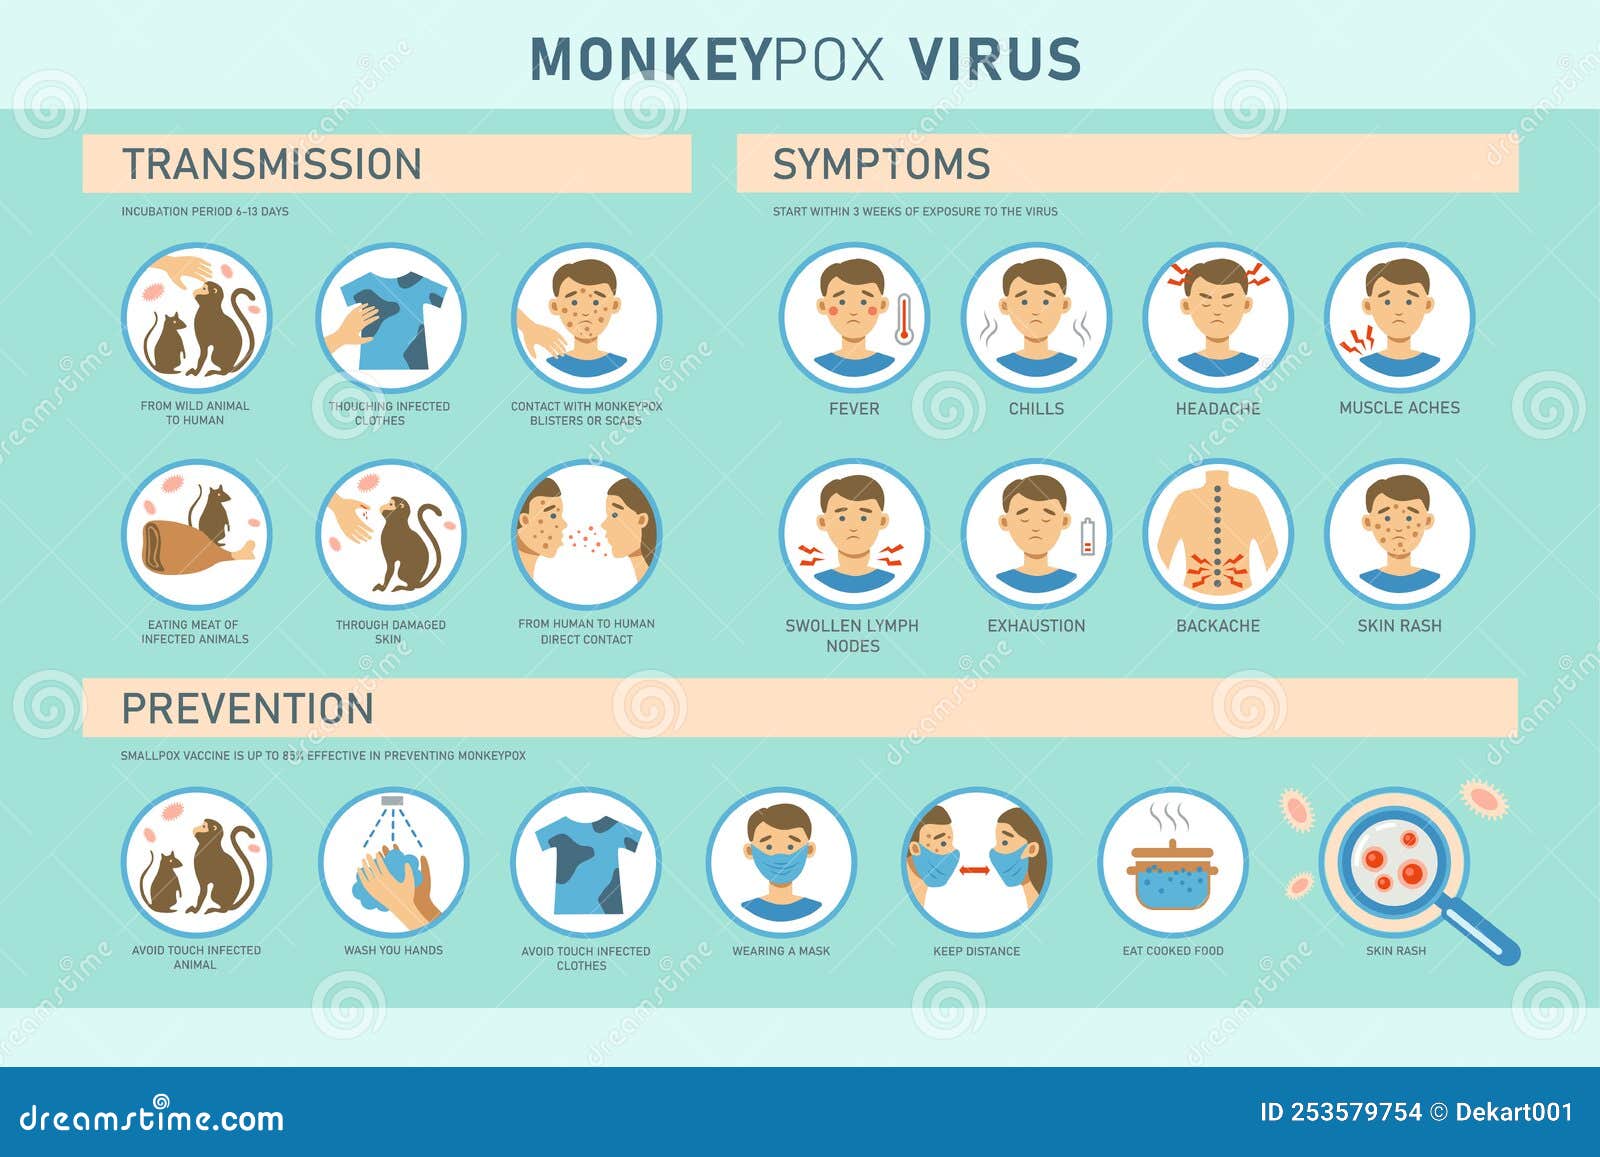 monkeypox virus transmission, symptoms and prevention infographics with icons.